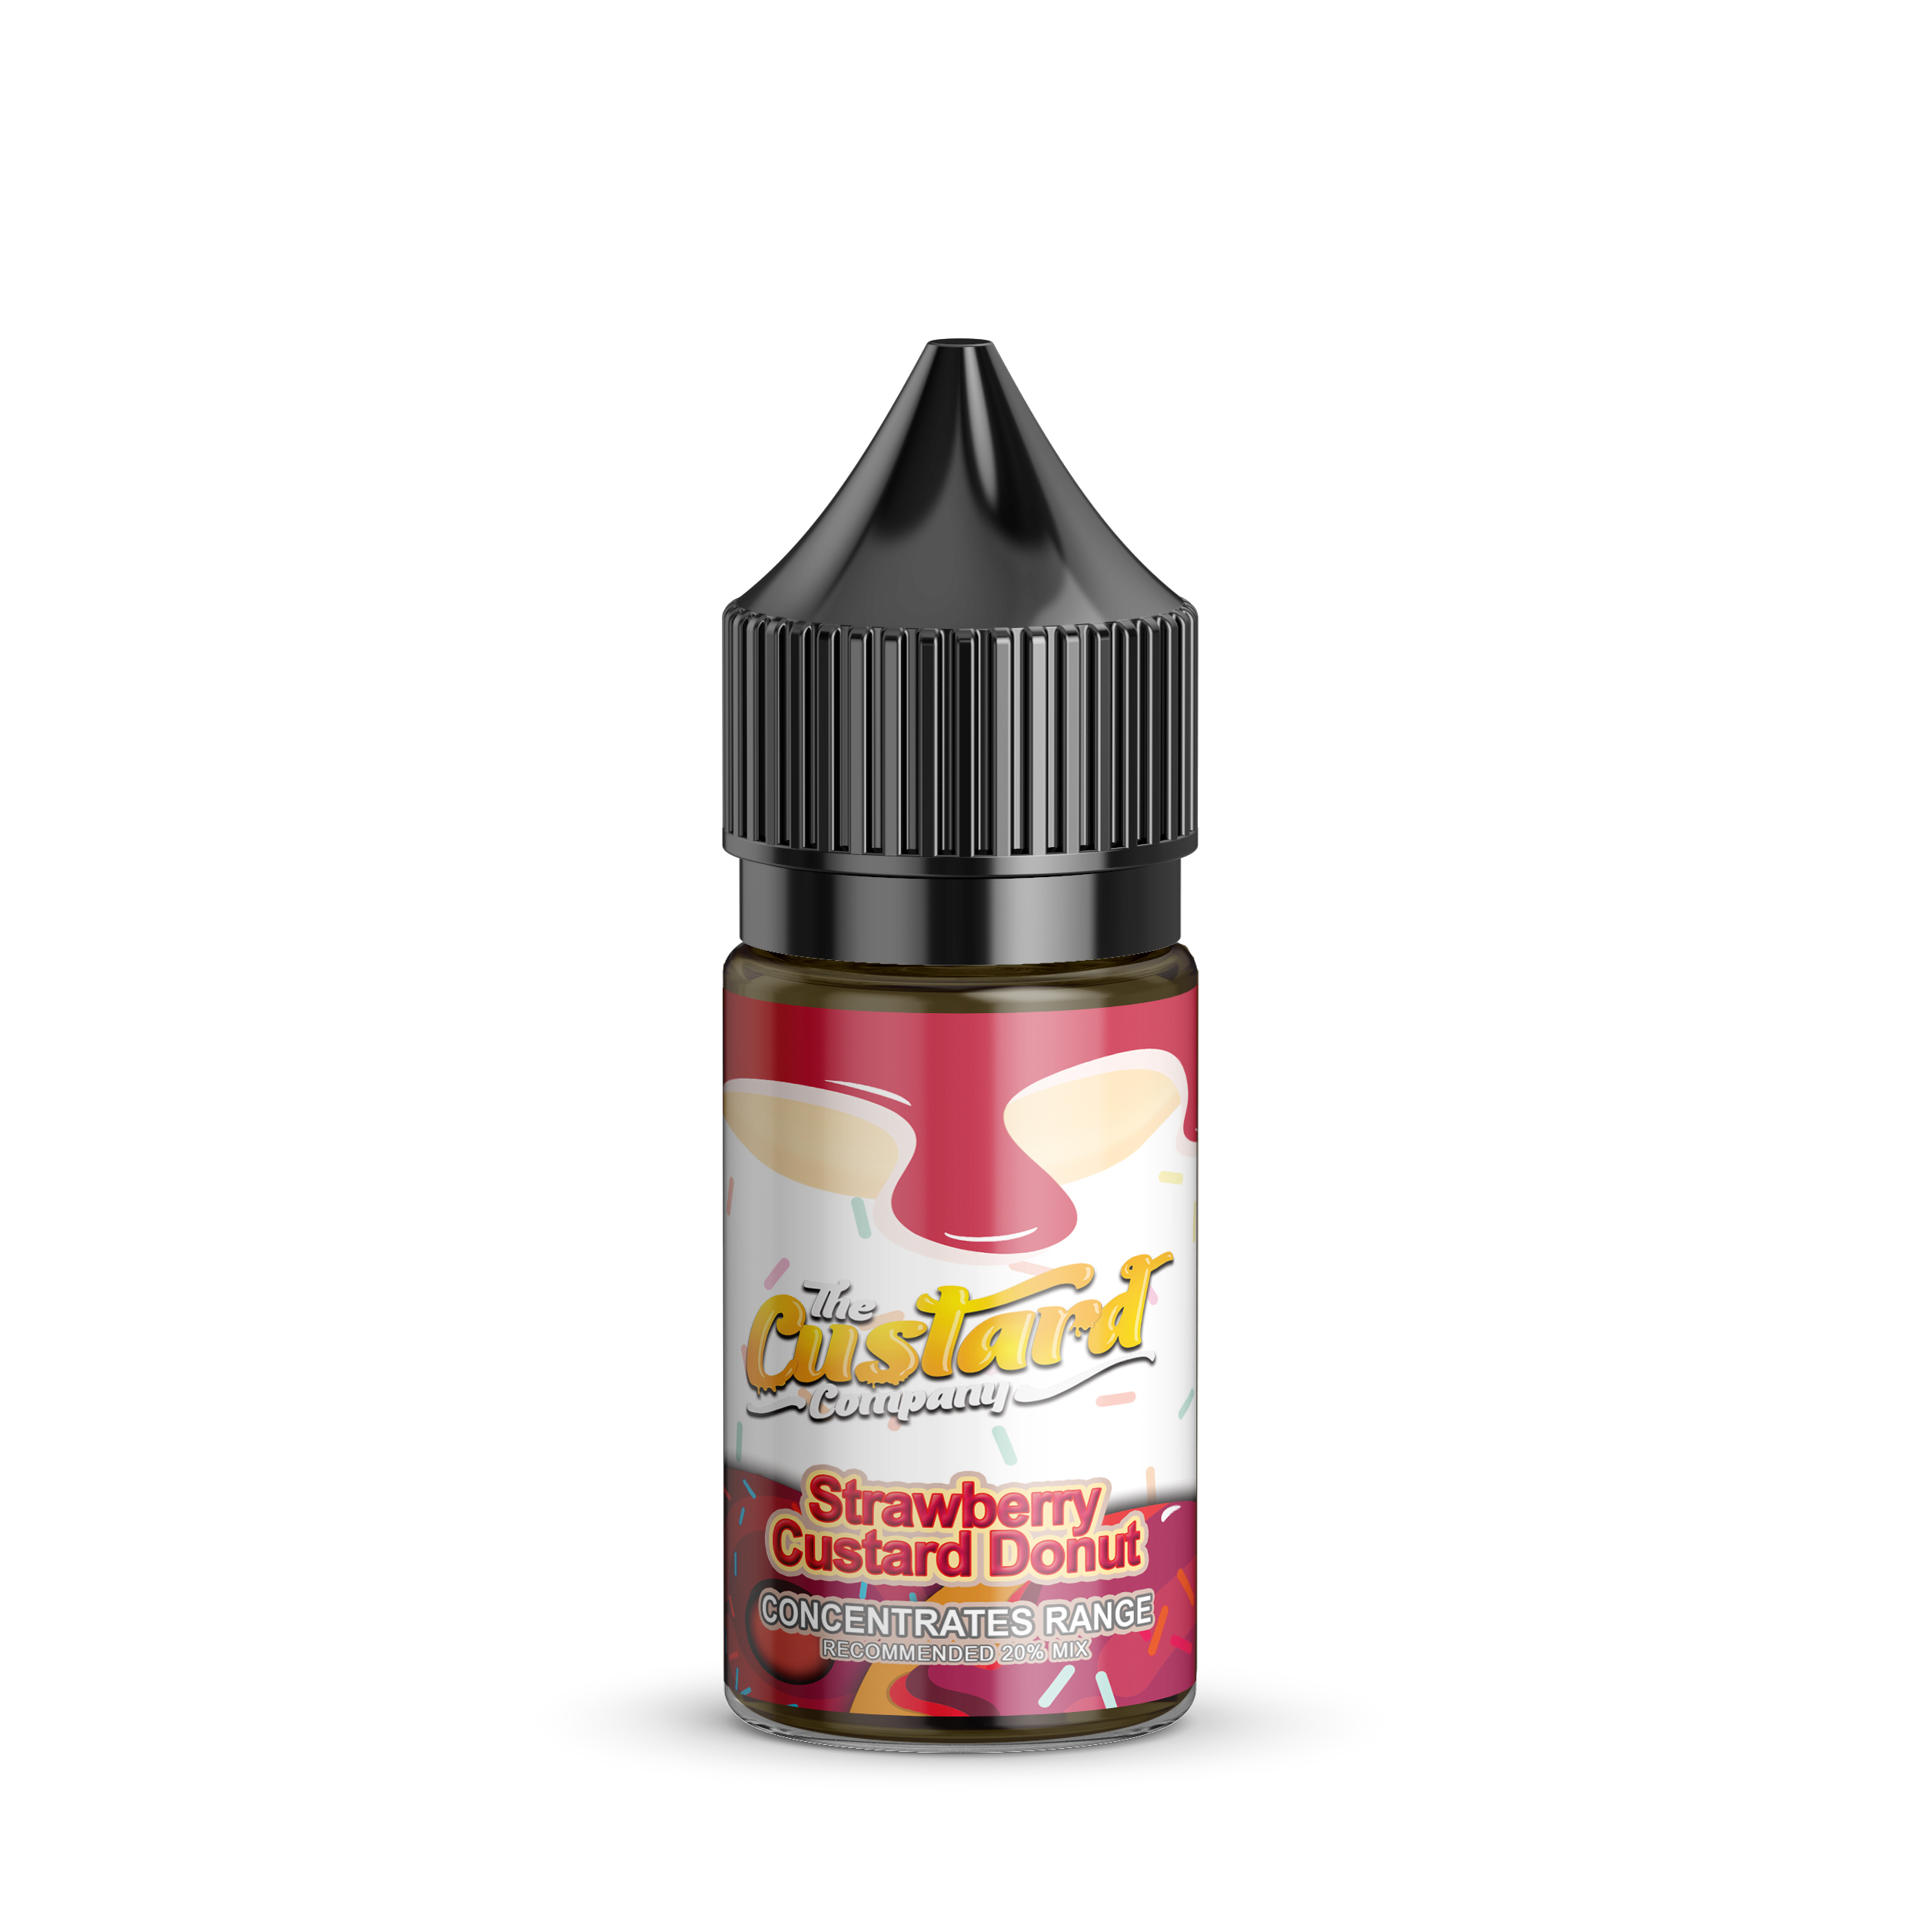 Strawberry Custard Doughnut Flavour Concentrate by The Custard Company